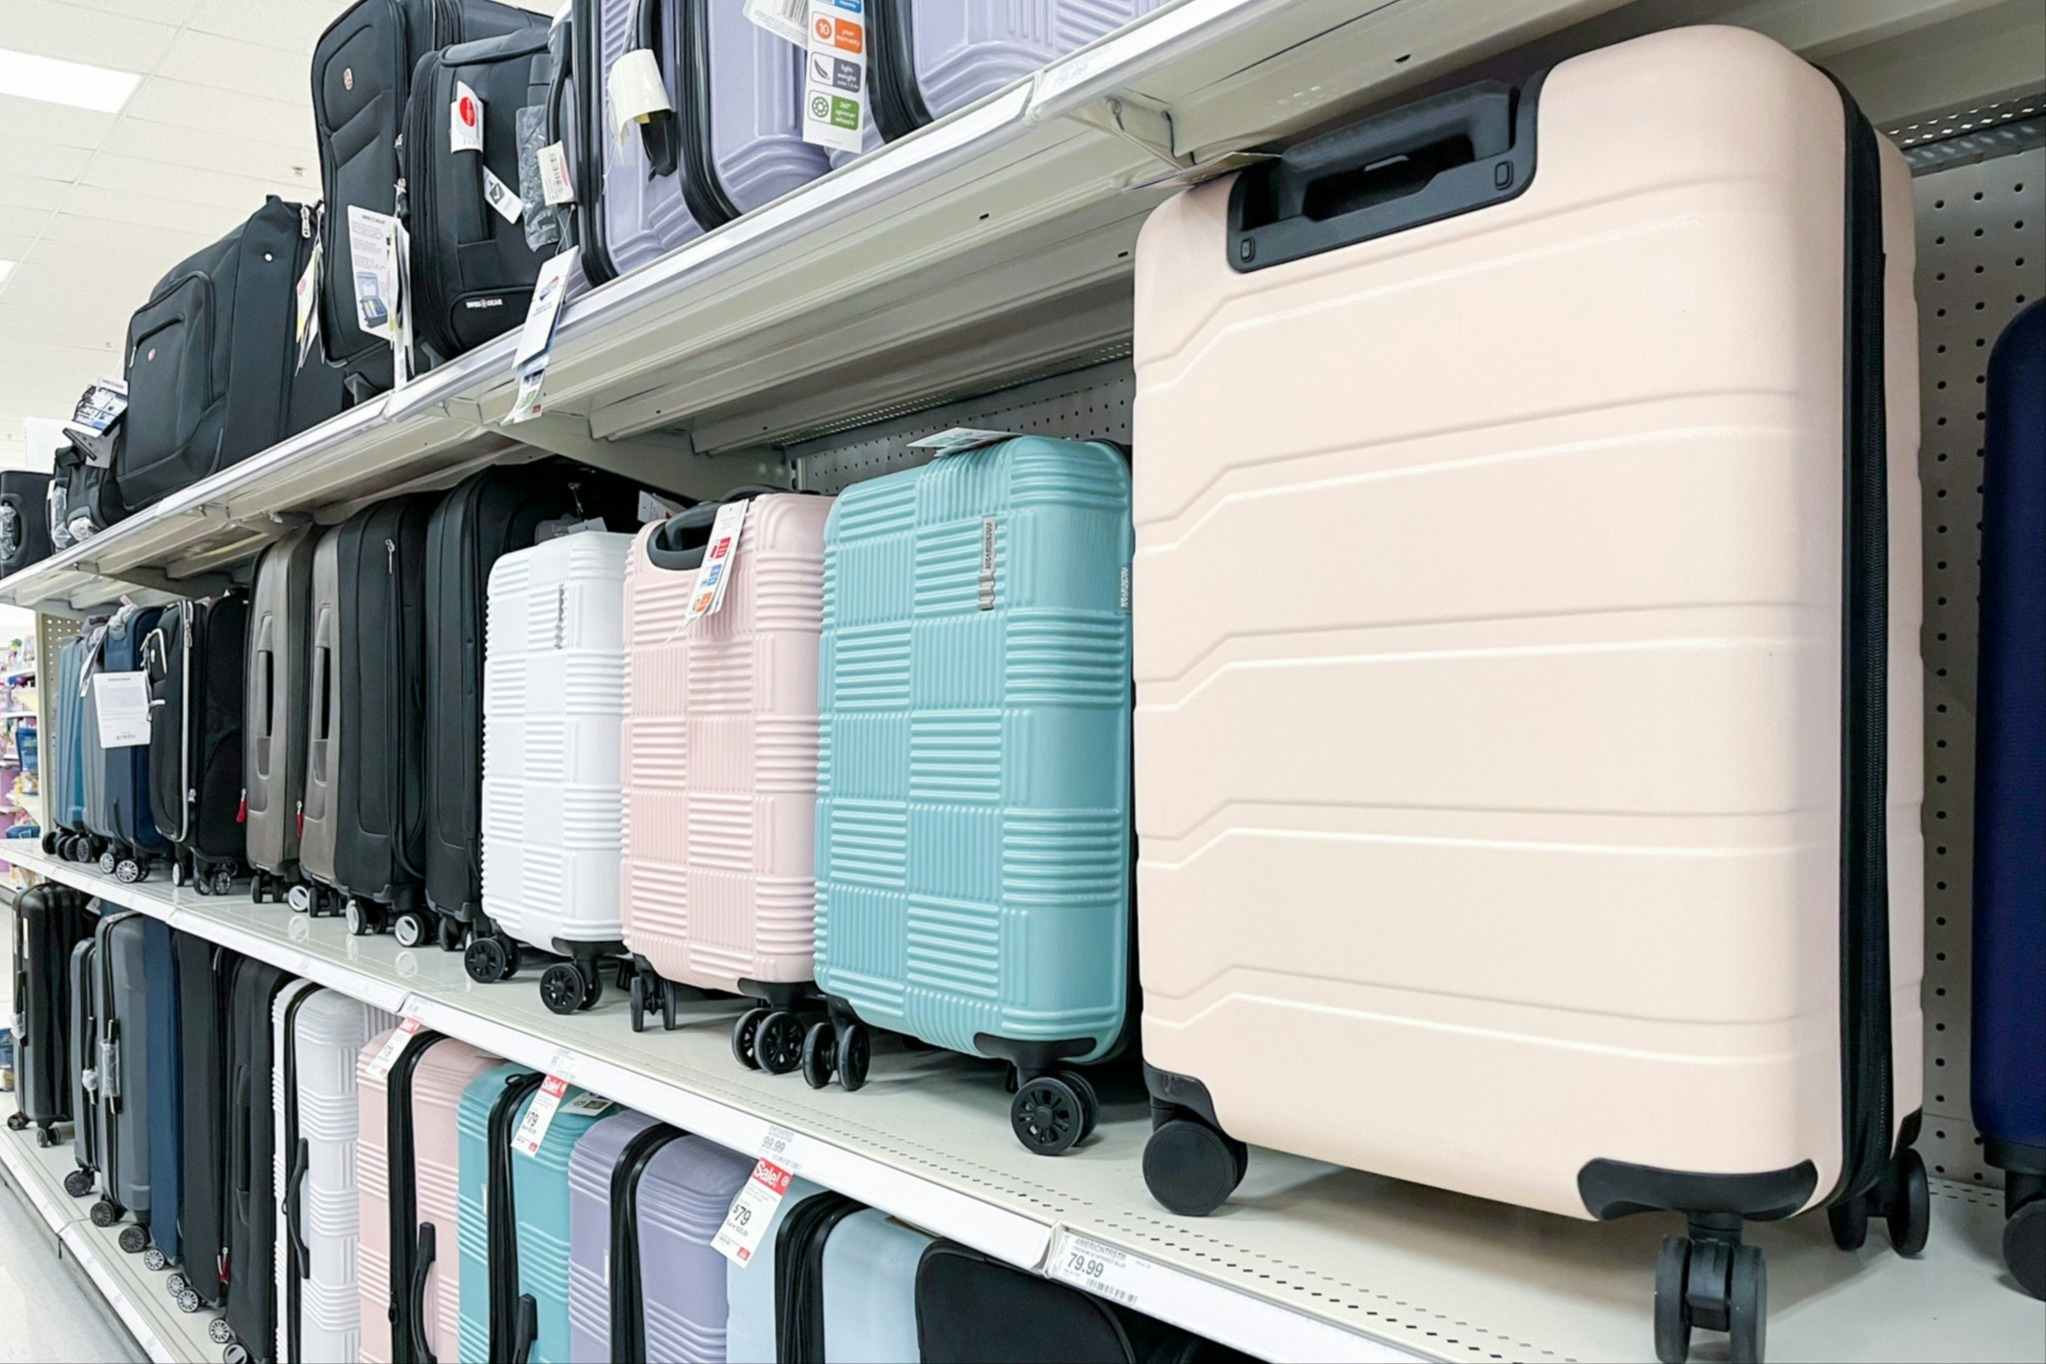 Open Story Luggage Deals, as Low as $13.29 at Target